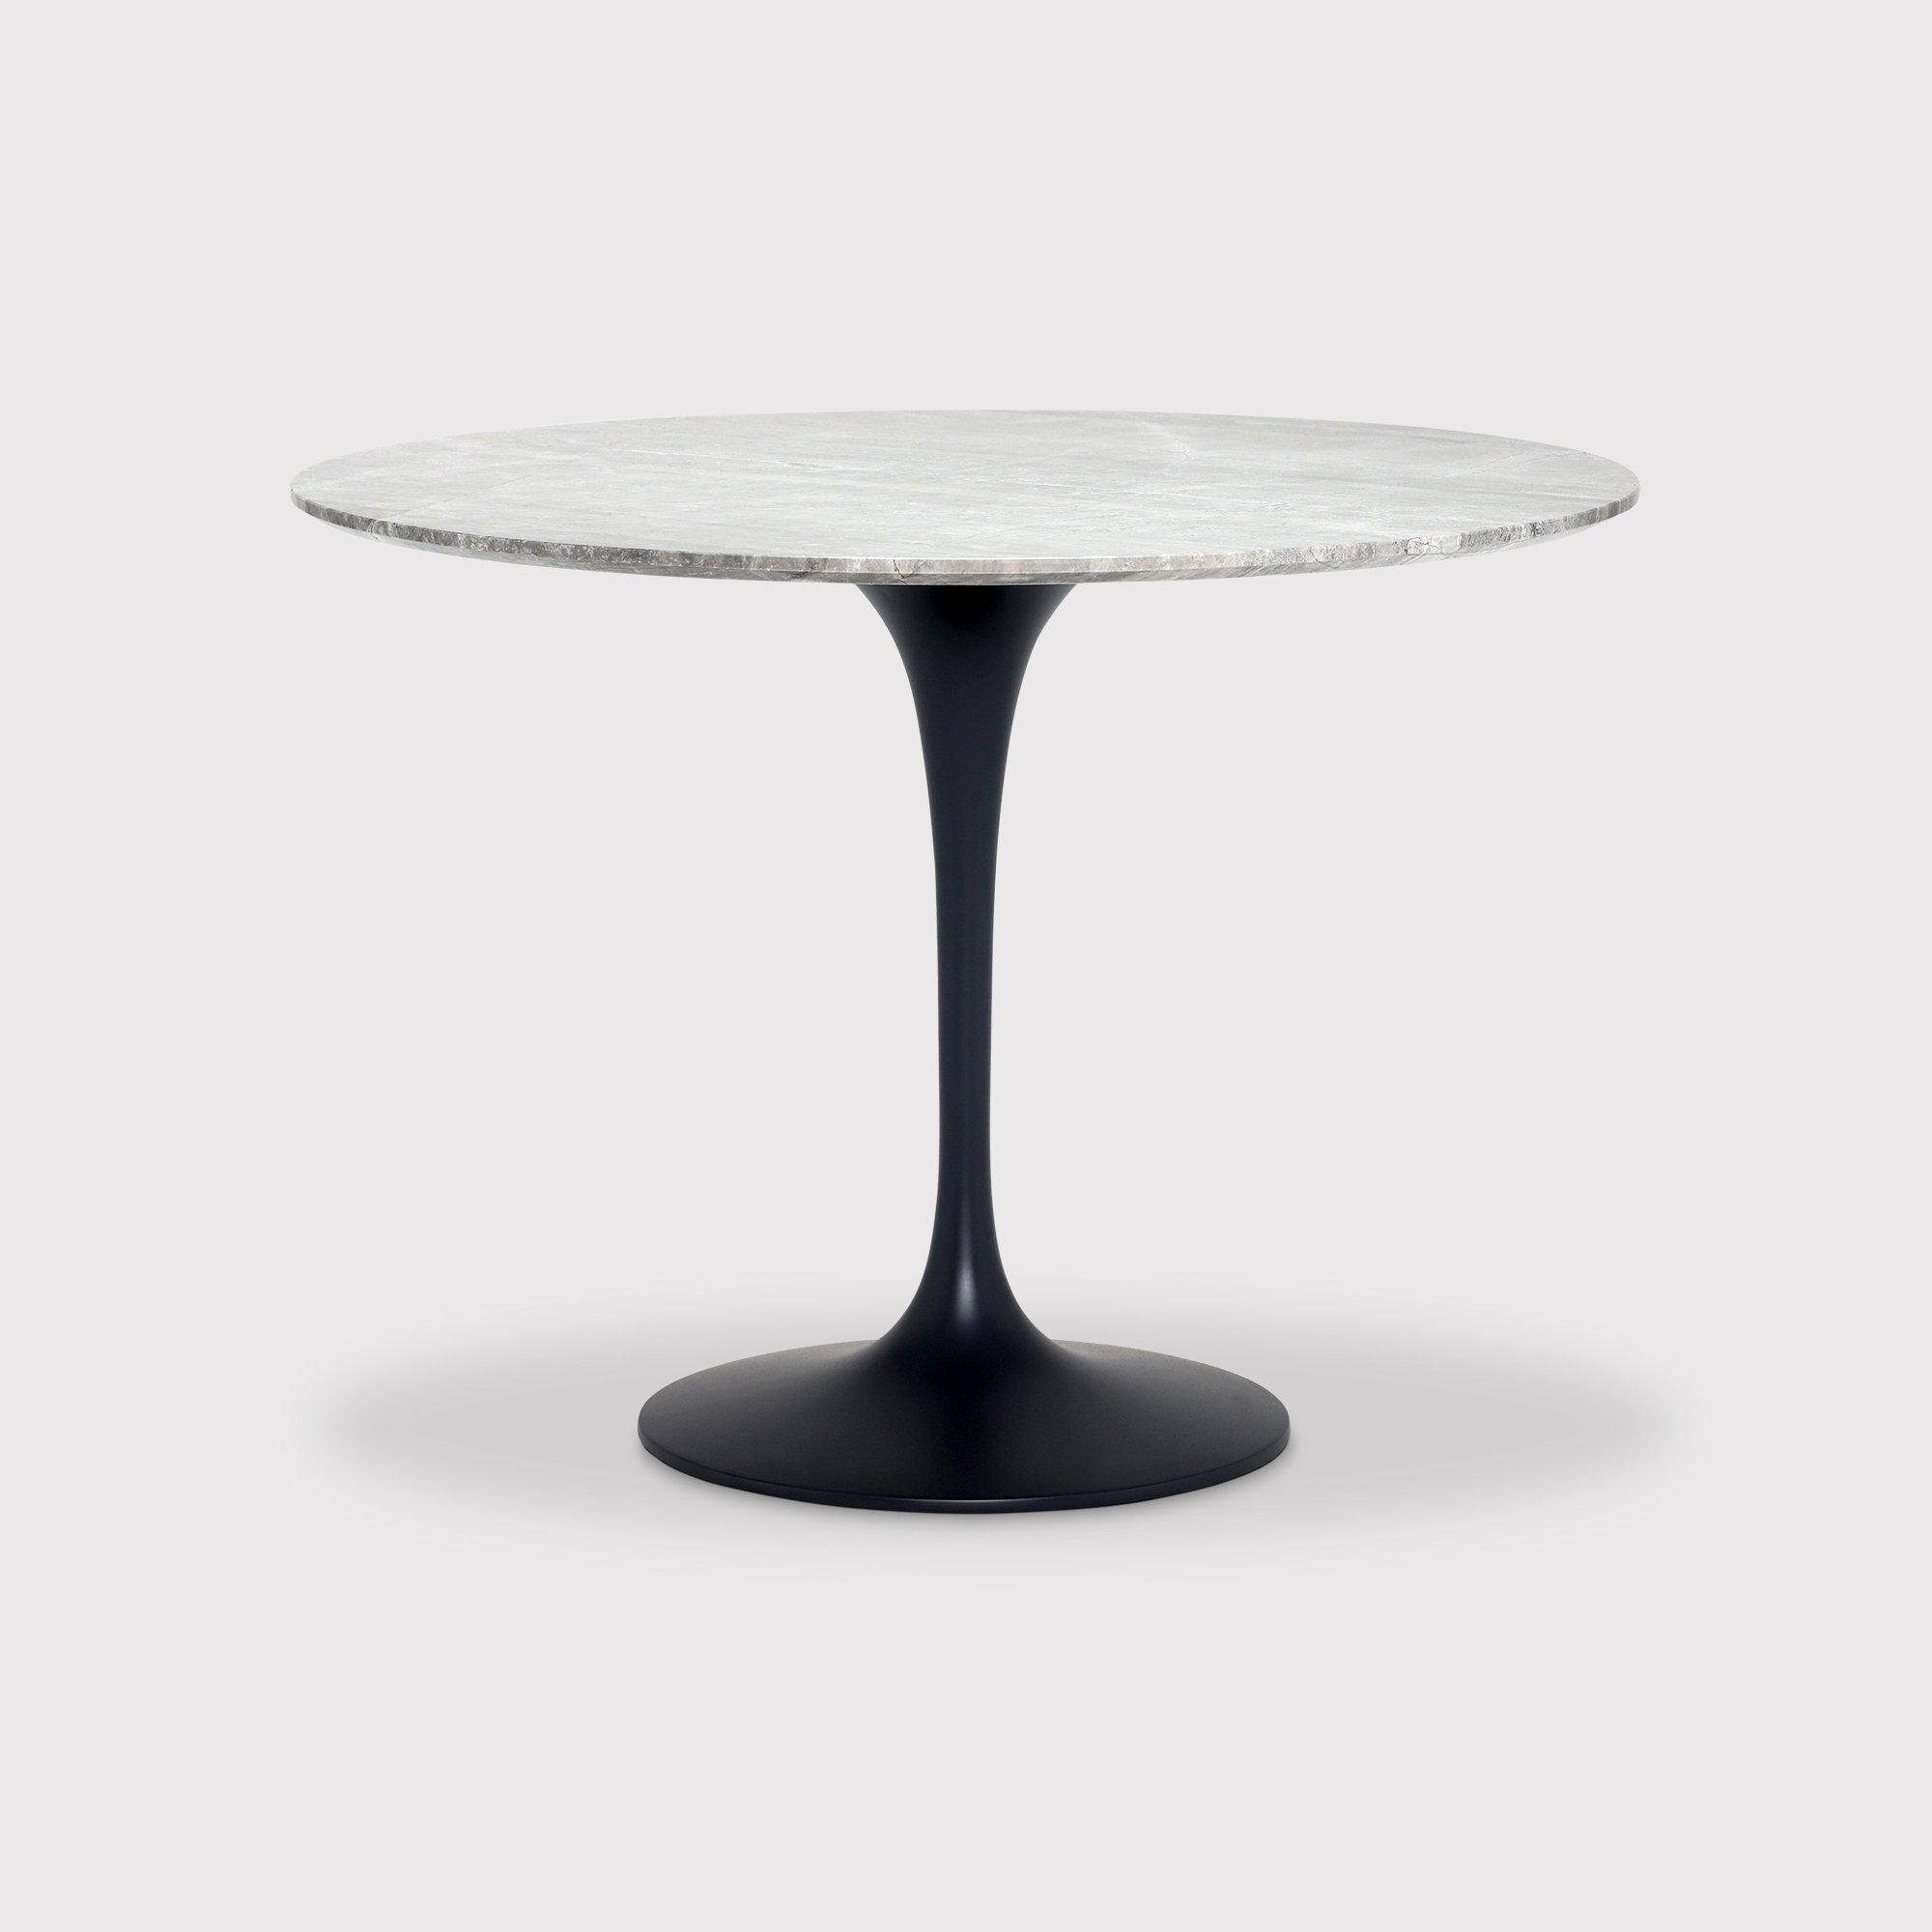 Nell Round Dining Table, Grey | Barker & Stonehouse